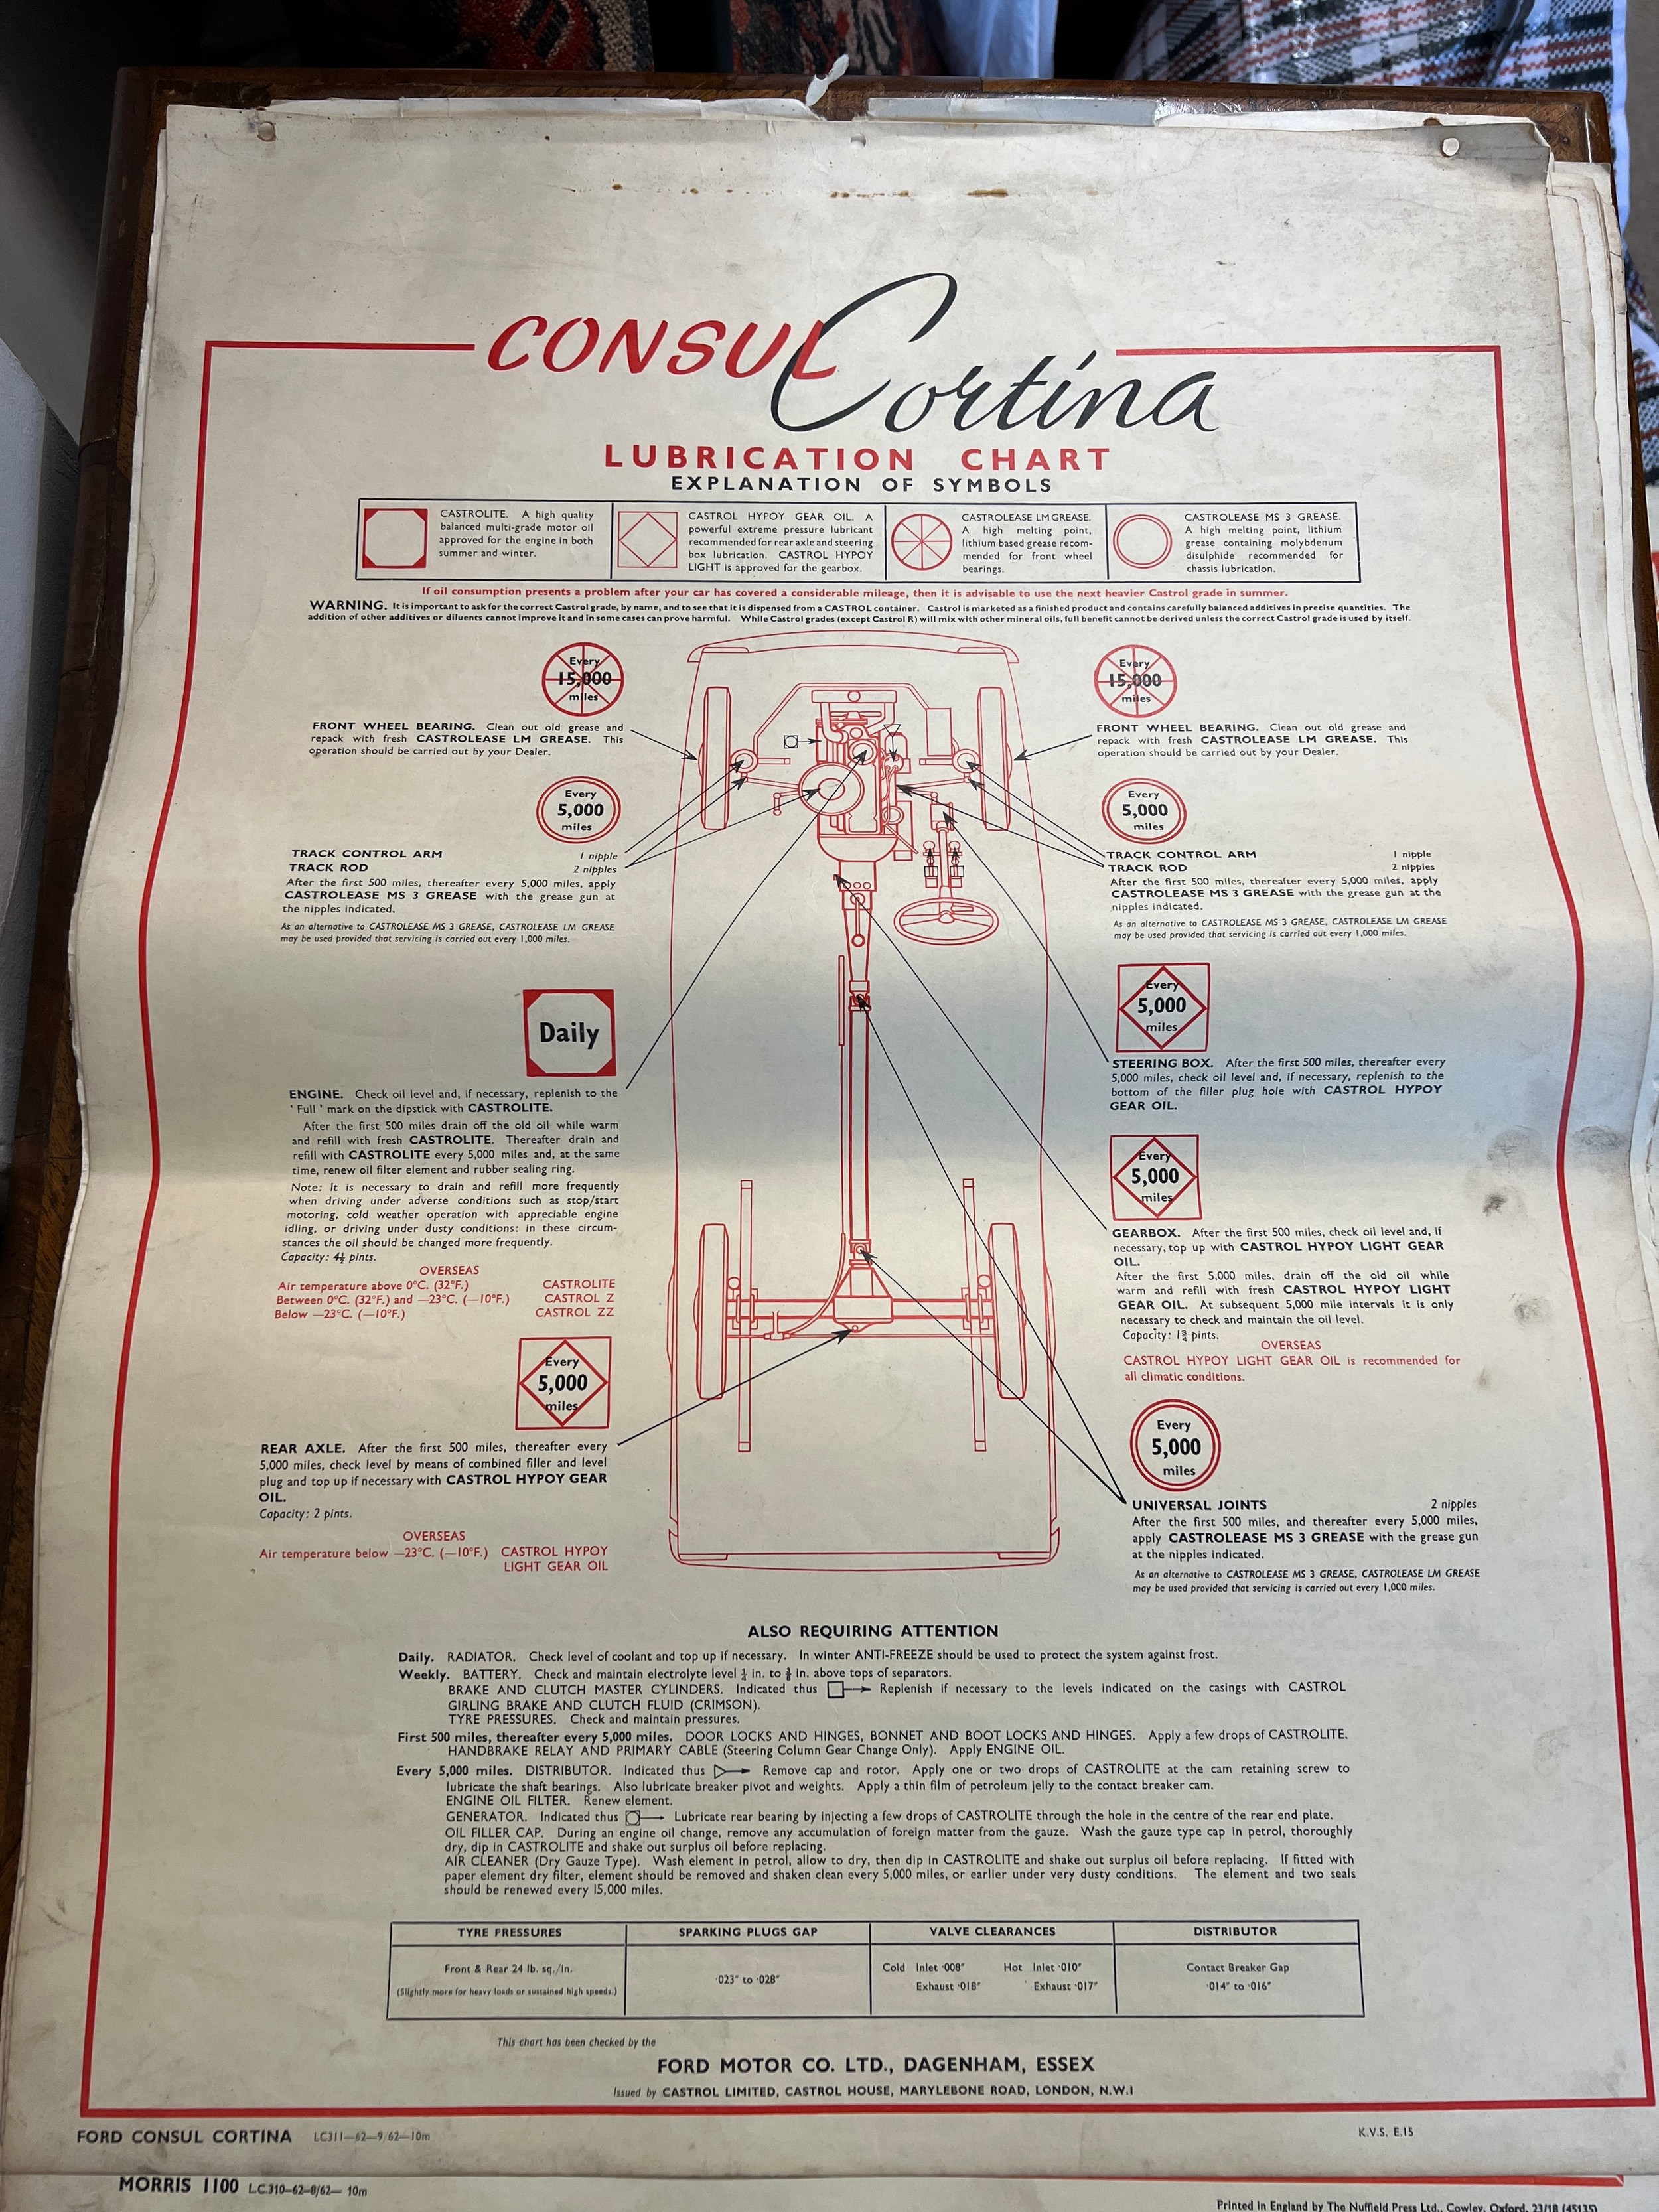 Thirty one vintage car lubrication charts to include Wolseley, Morris, MG 1100, Morris 1100, - Image 7 of 31